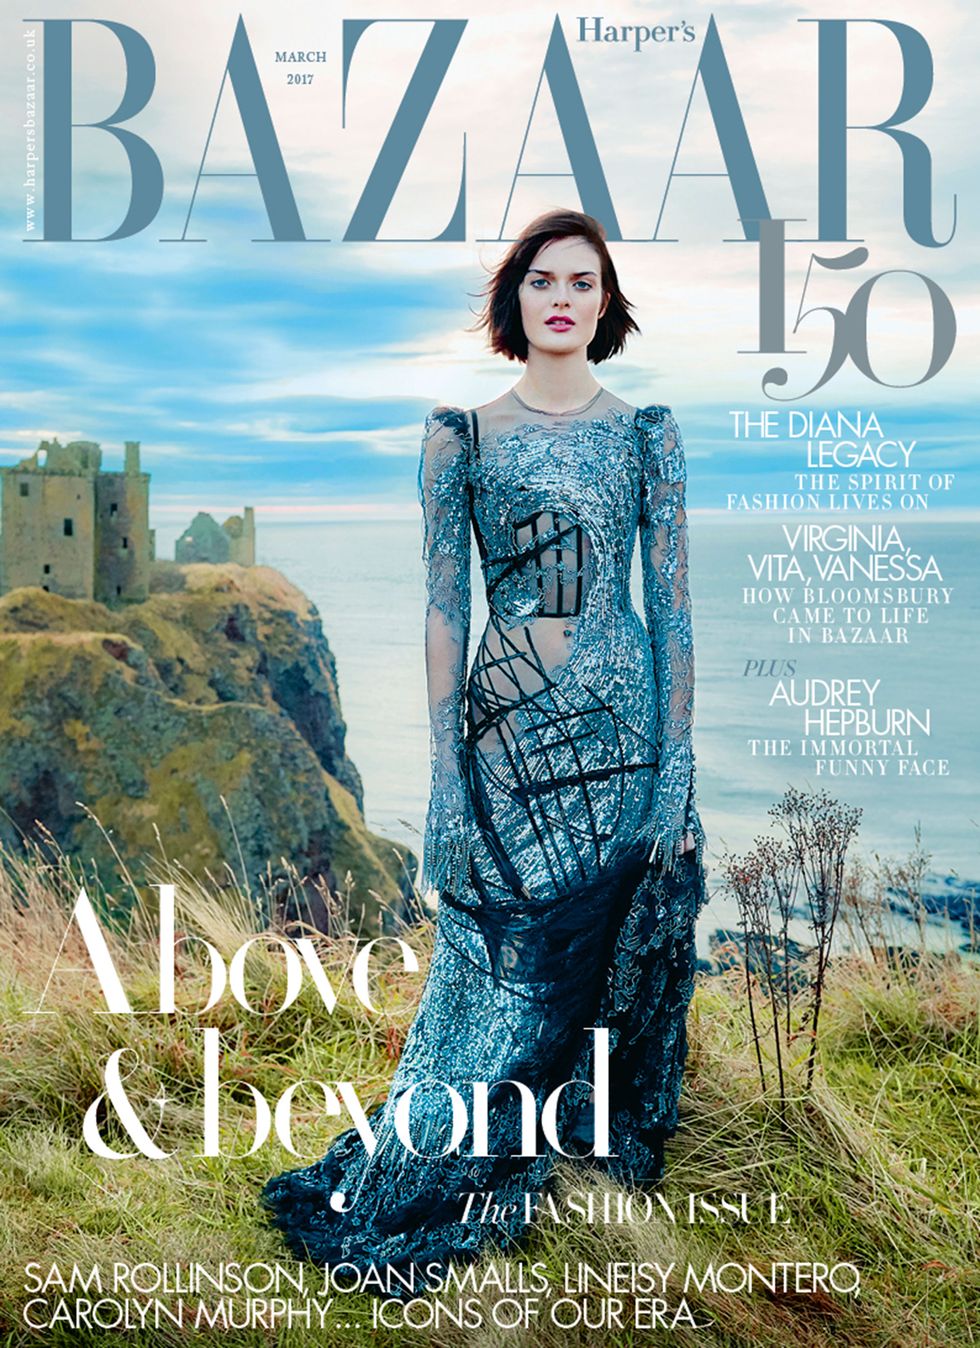 Sam Rollinson on the March issue 2017 cover of Harper's Bazaar